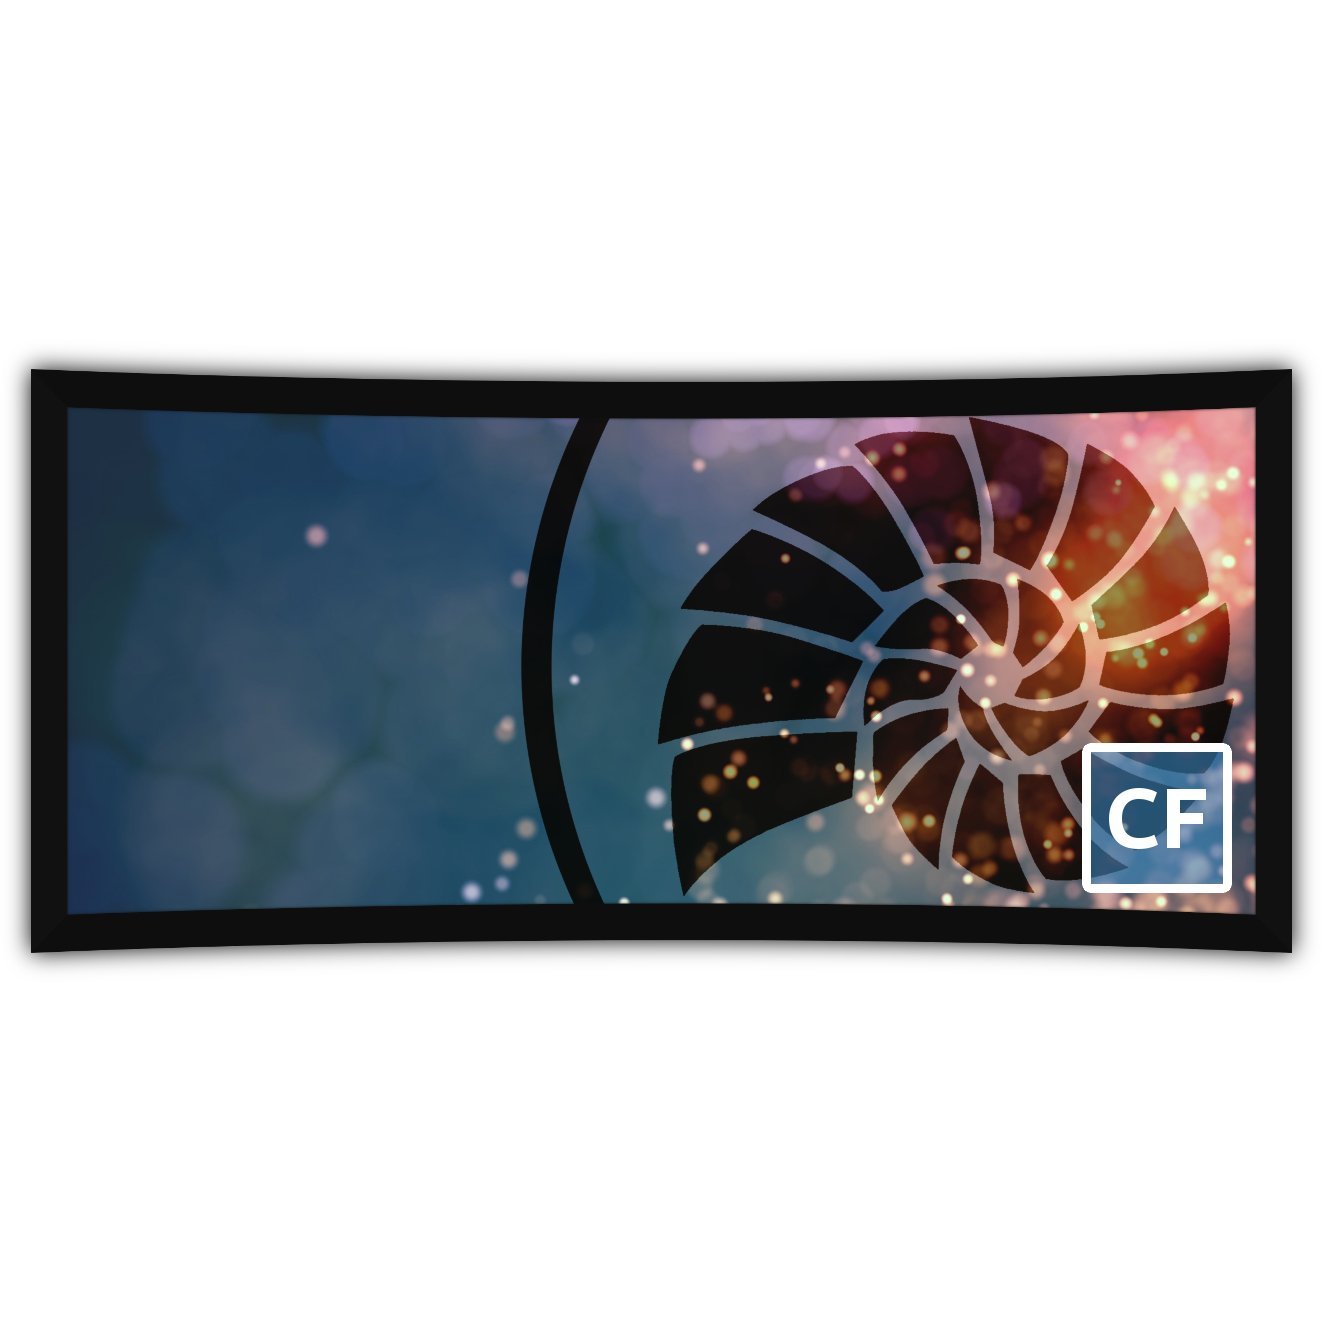 Deluxe Curved Series, cf Screens from Severtson Screens have a slight curve, and 2.35 to 1 UltraWide cinema format designed to deliver a more immersive experience.